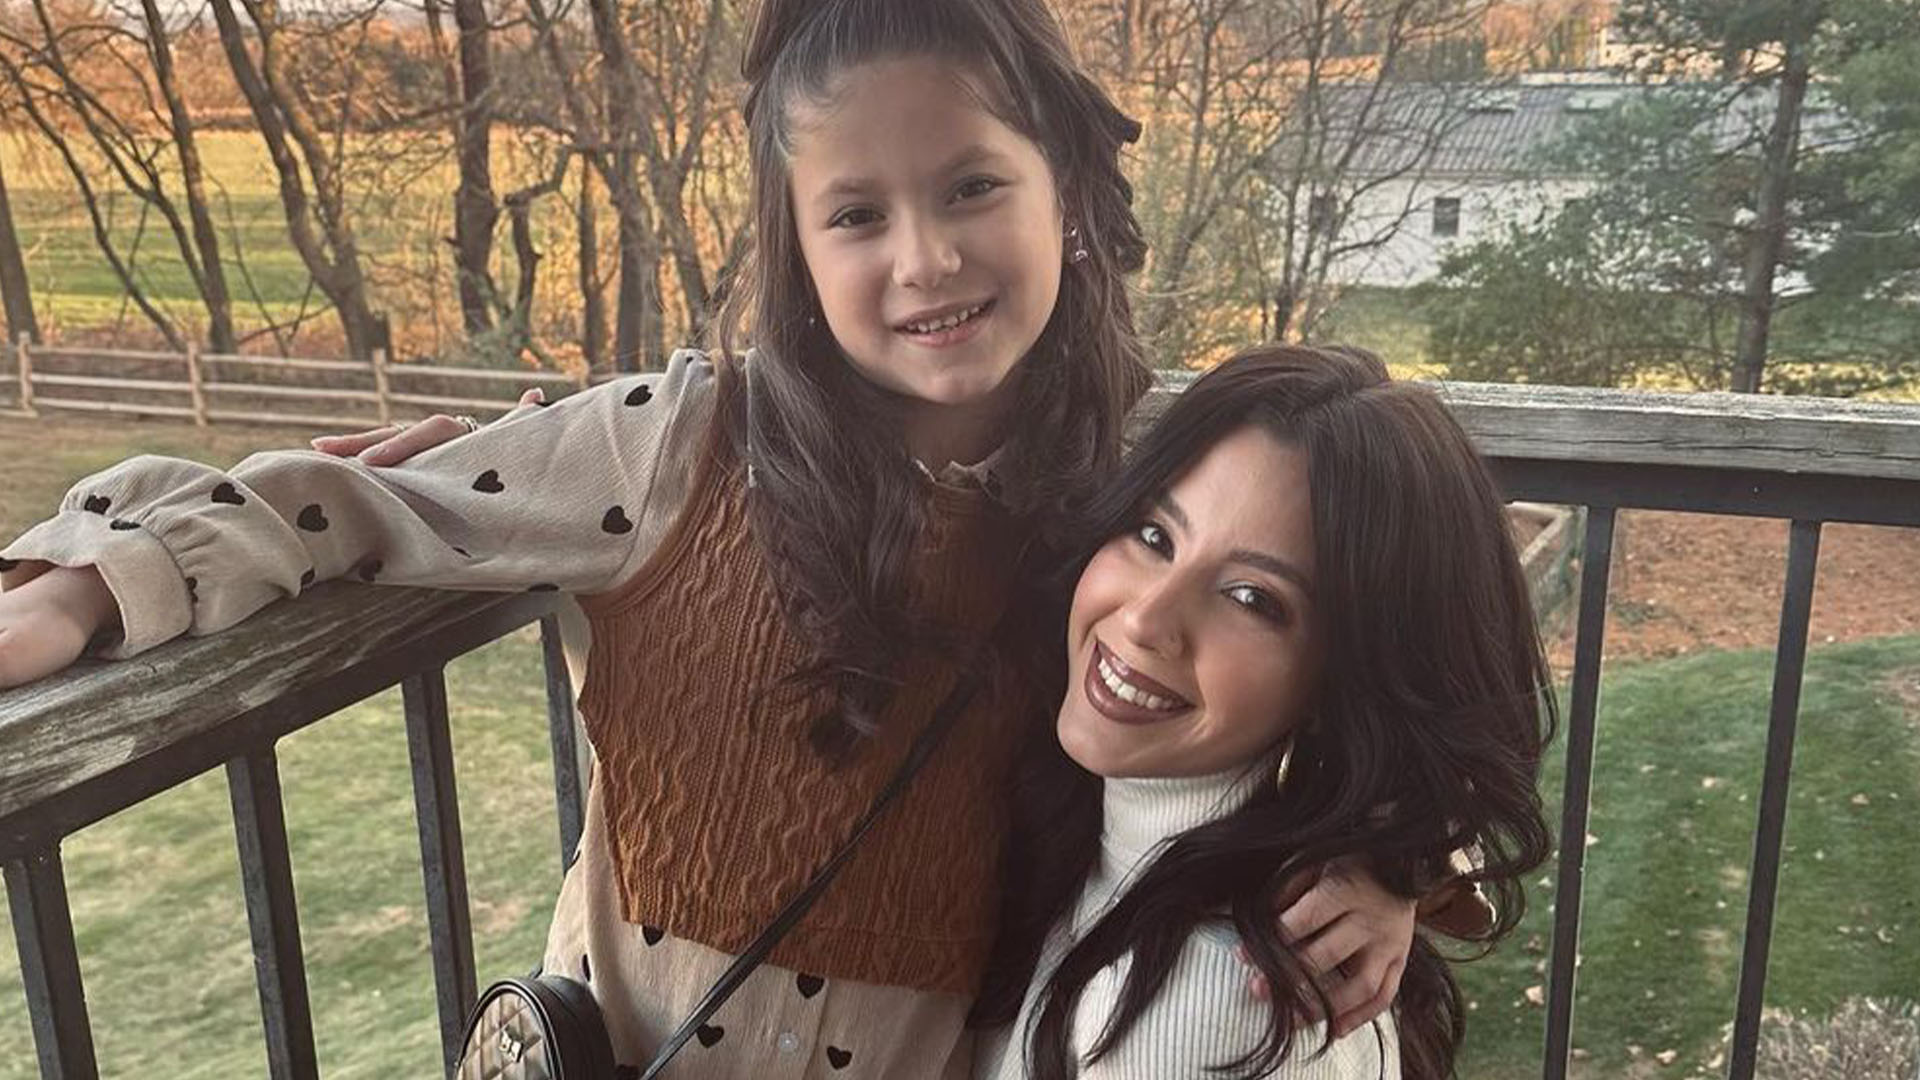 Vee Rivera, Teen Mom Fan Favorite shows her toned legs and mini skirt in a photo taken with daughter Vivi (7